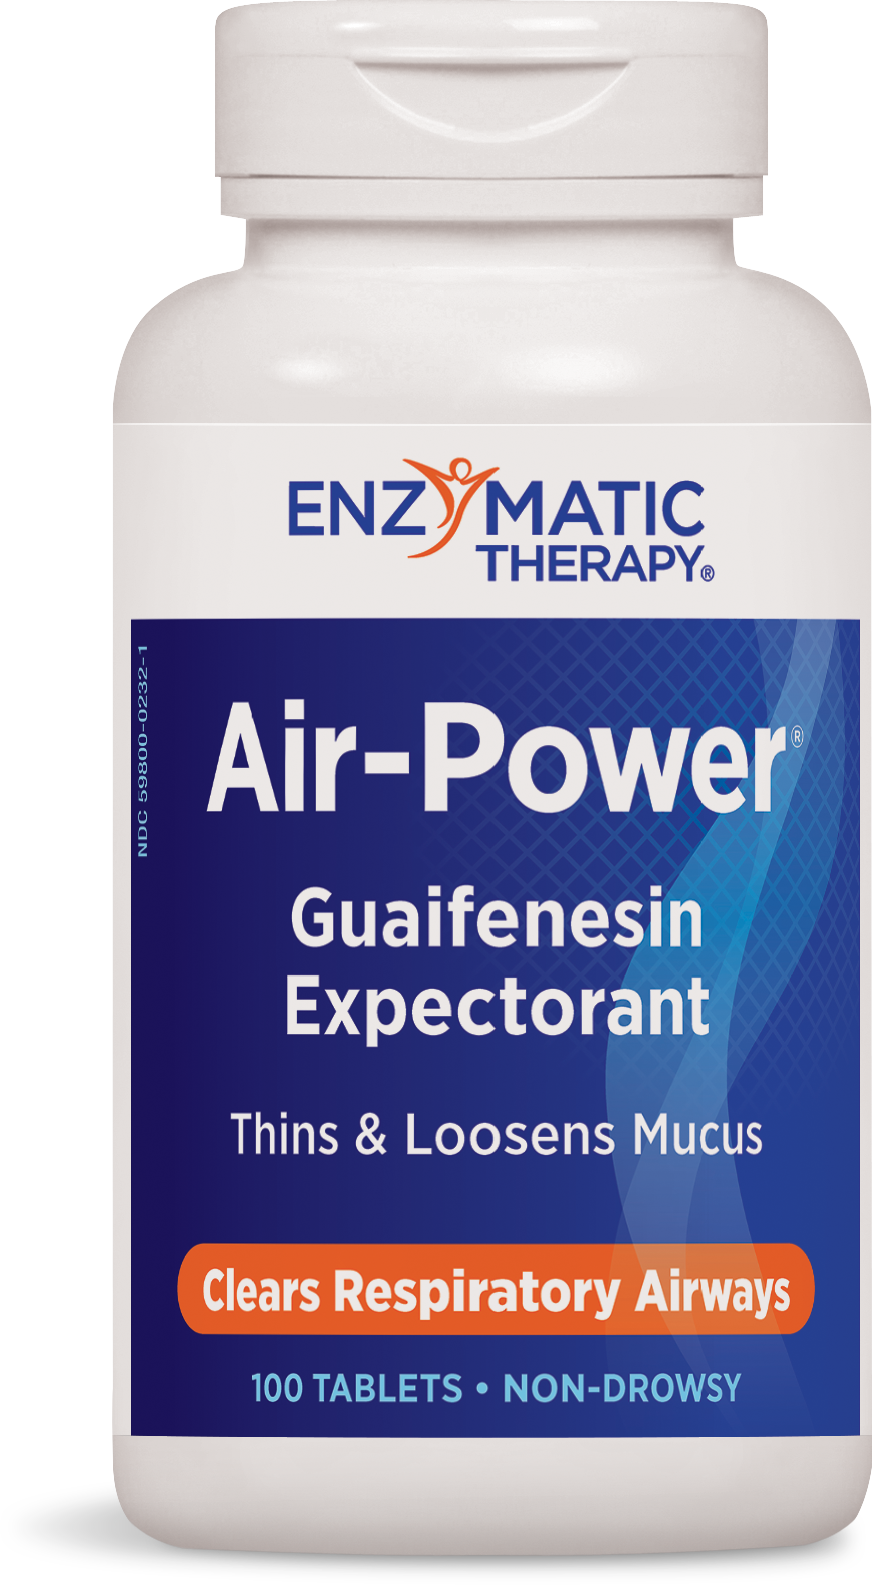 A bottle of Enzymatic Therapy Air-Power®